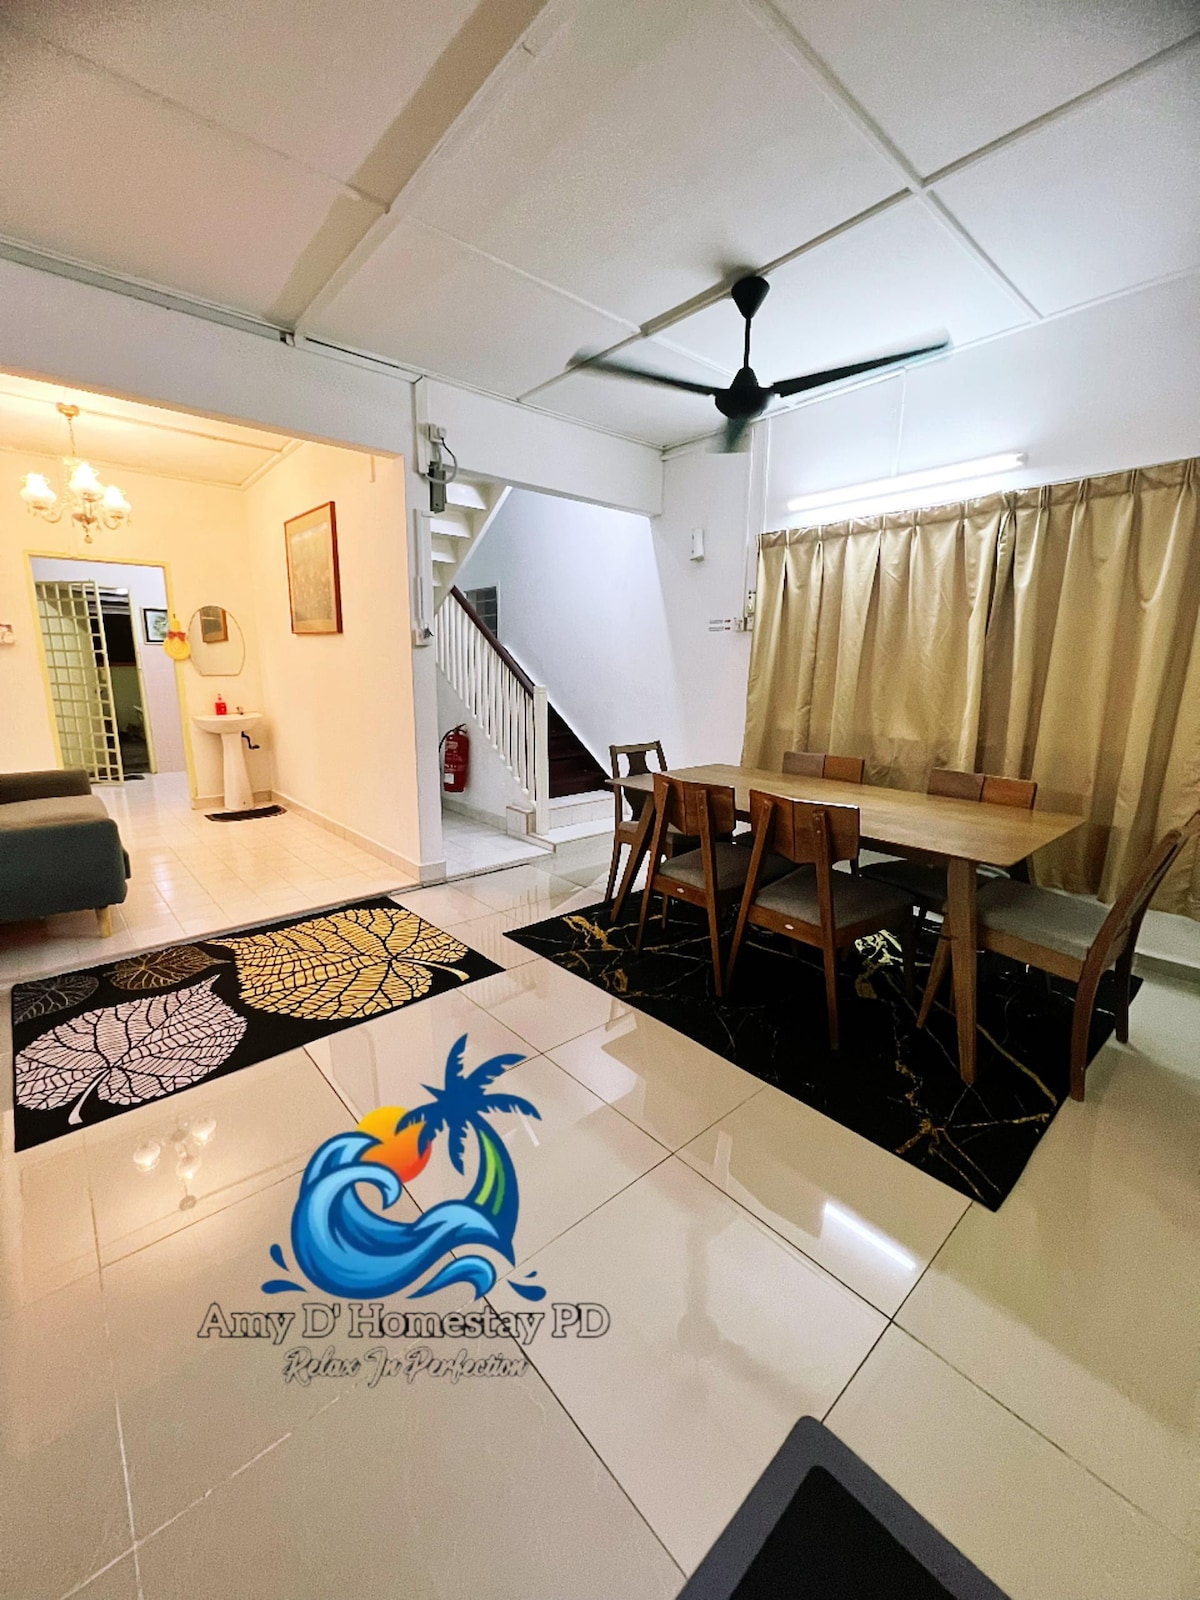 Amy D’Homestay Seafront T.Kemang